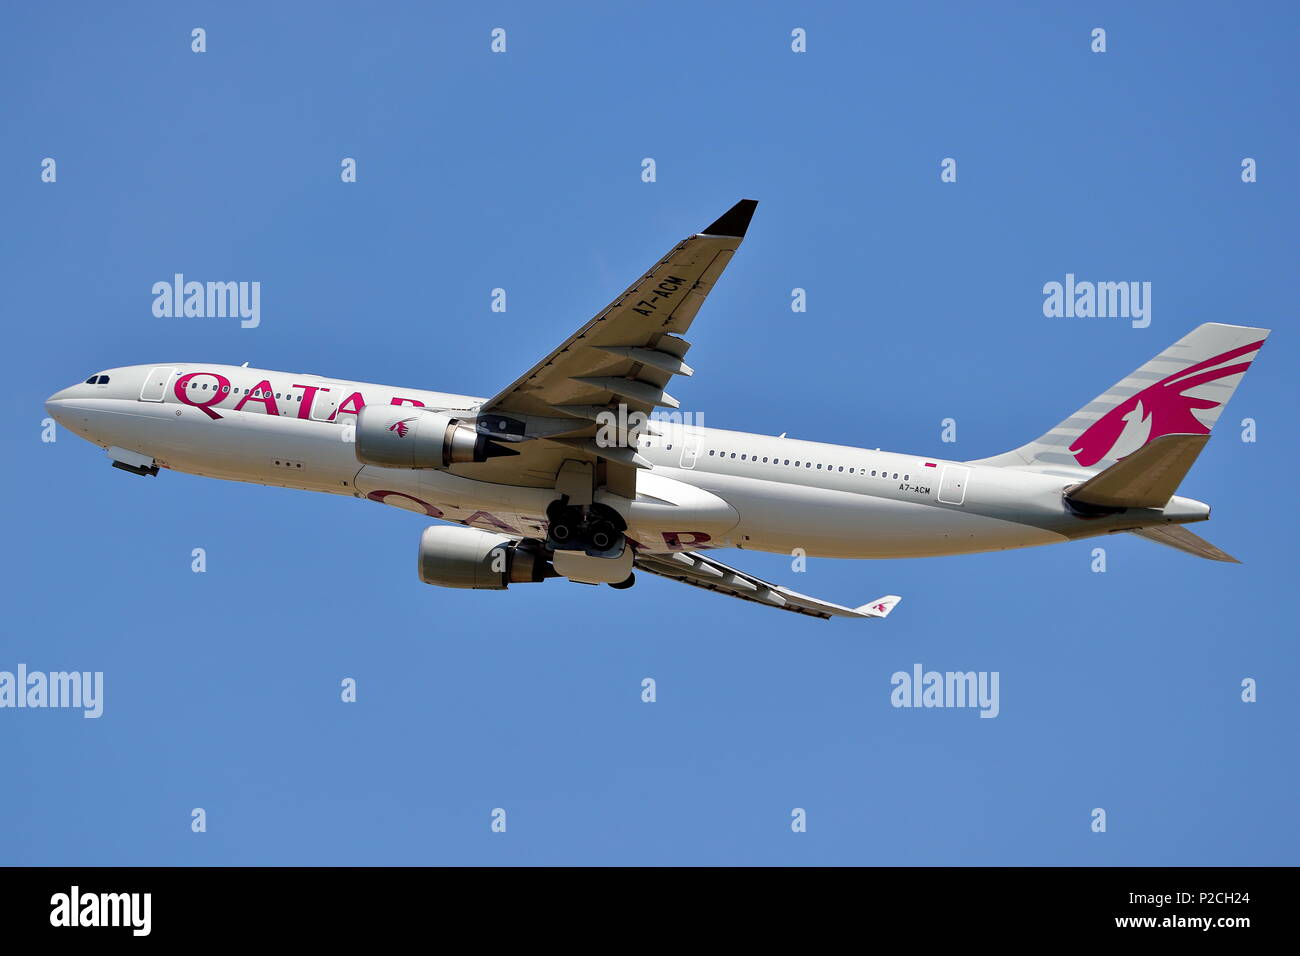 Qatar Airlines Airbus A330 A7-ACM taking off from London Heathrow Airport, UK Stock Photo